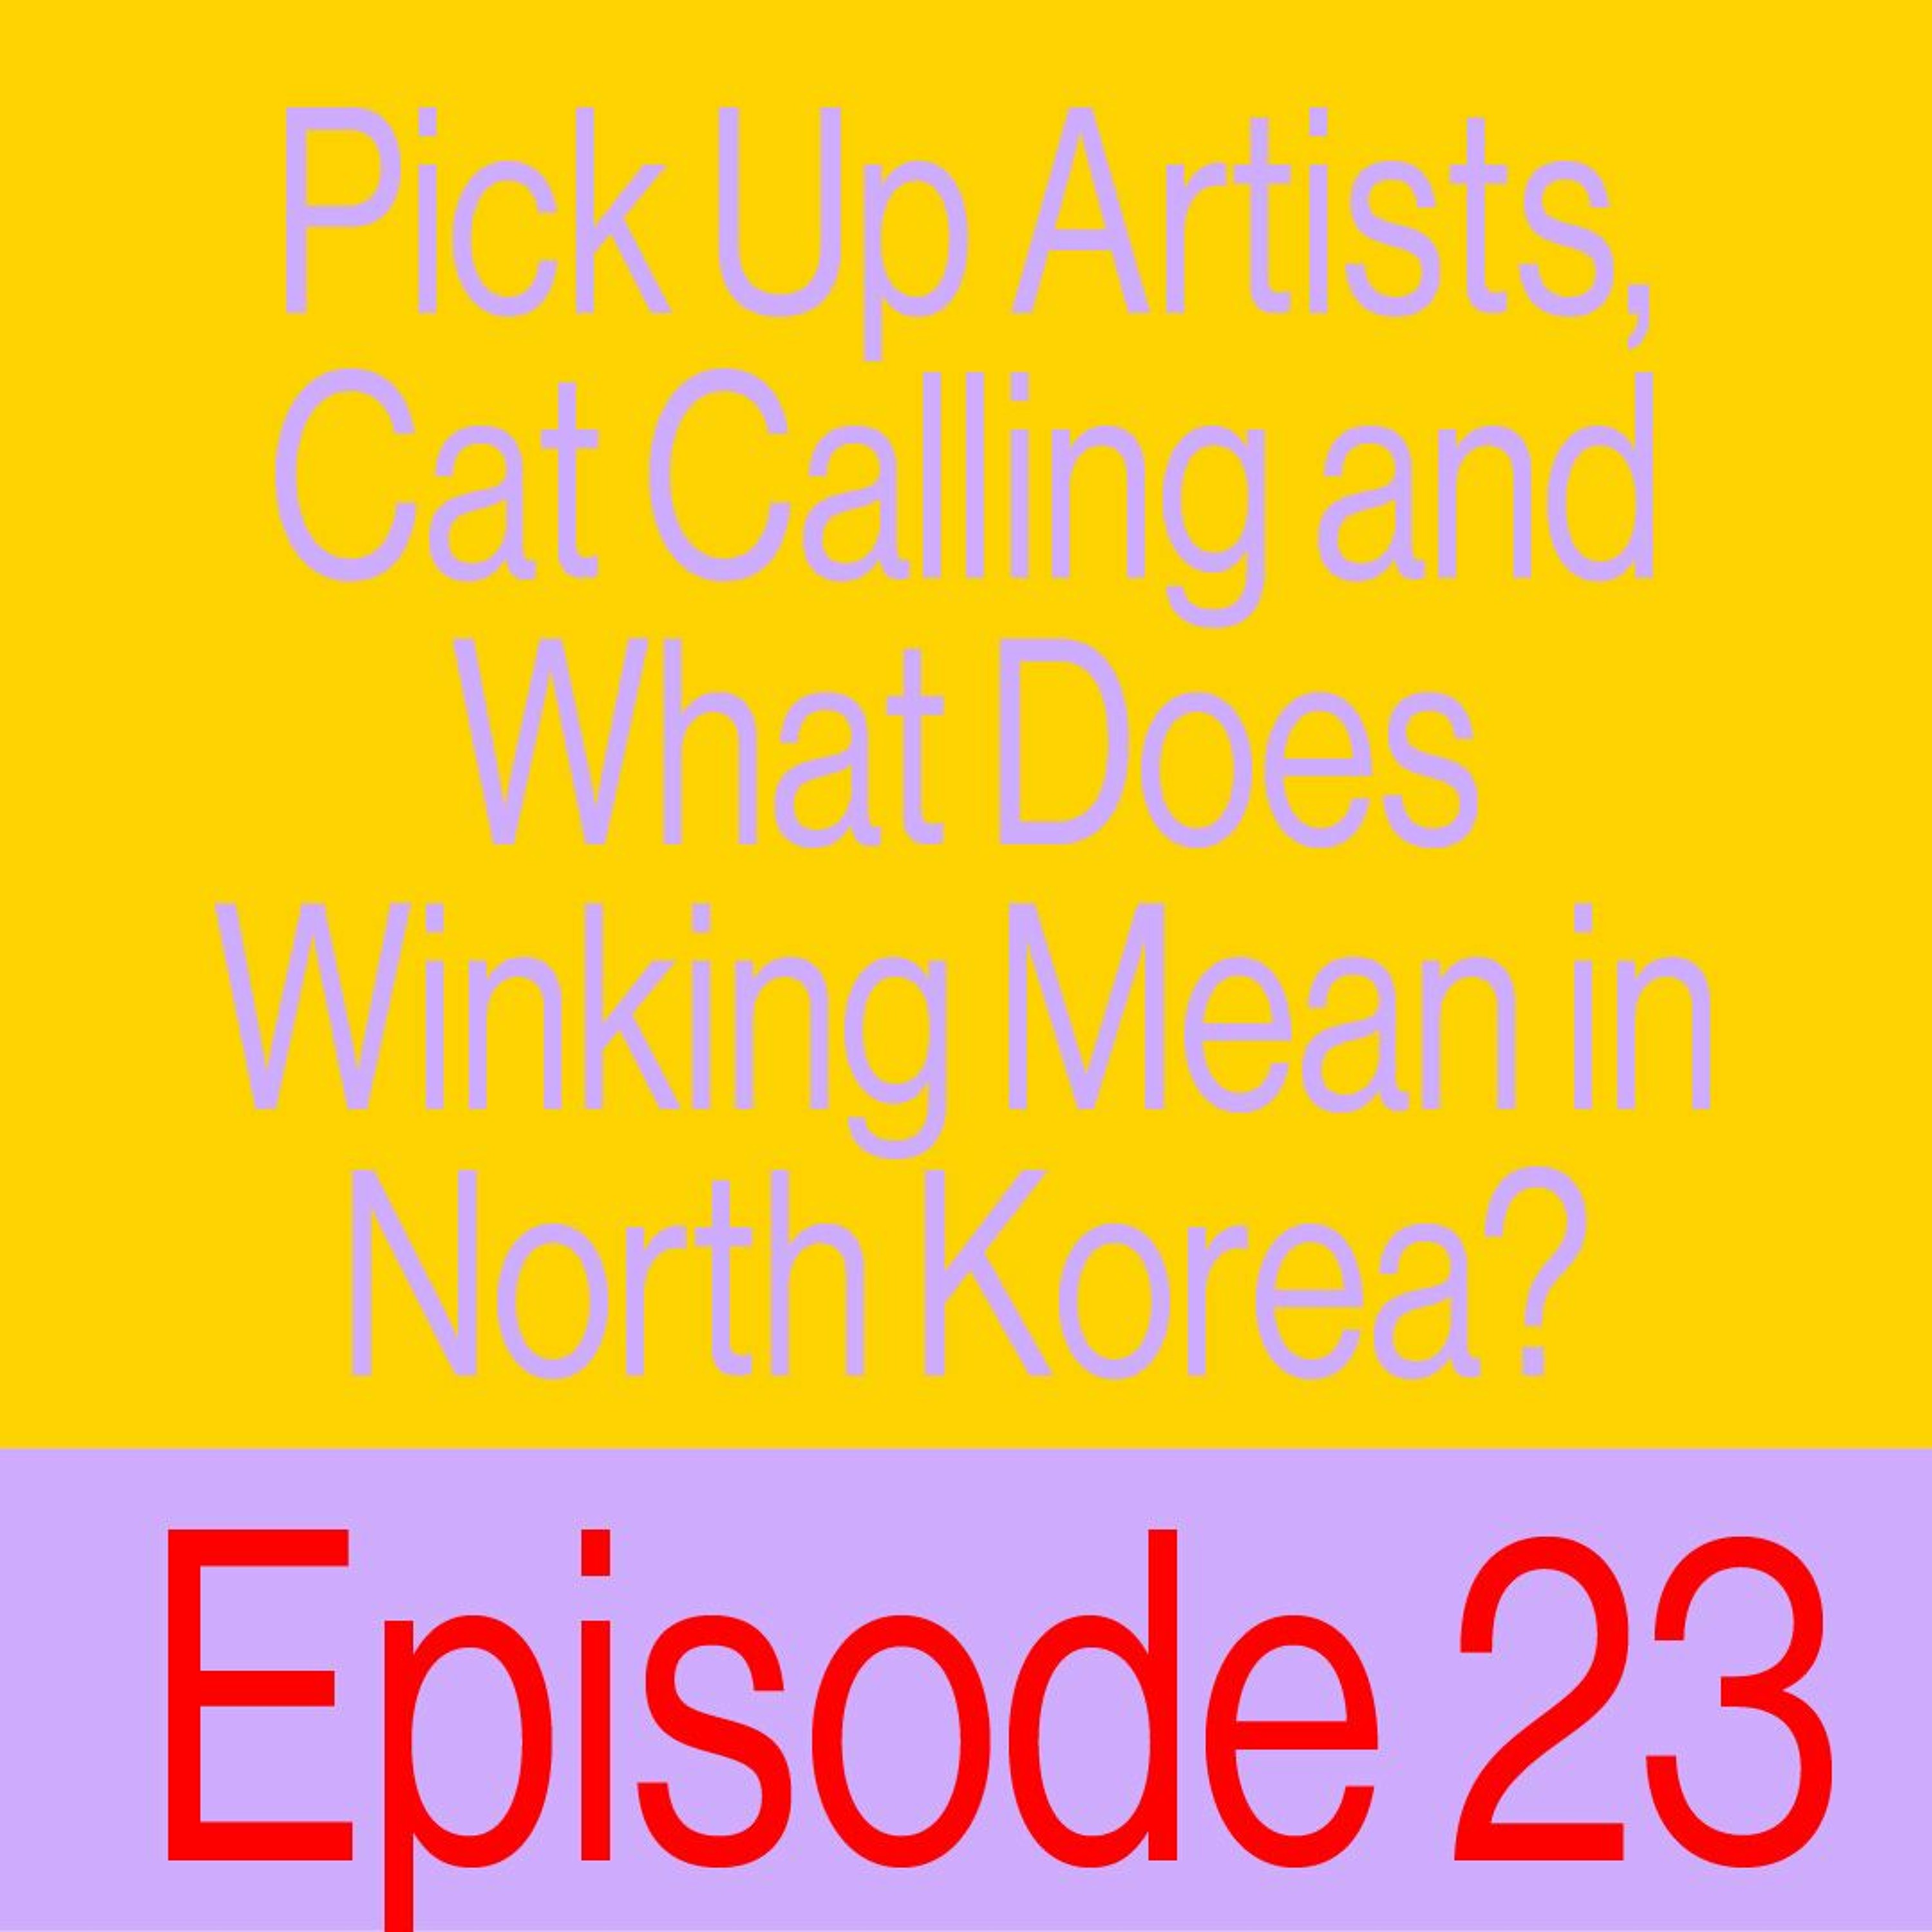 Episode 23: Pick Up Artists, Cat Calling, And What Does Winking Mean In North Korea?